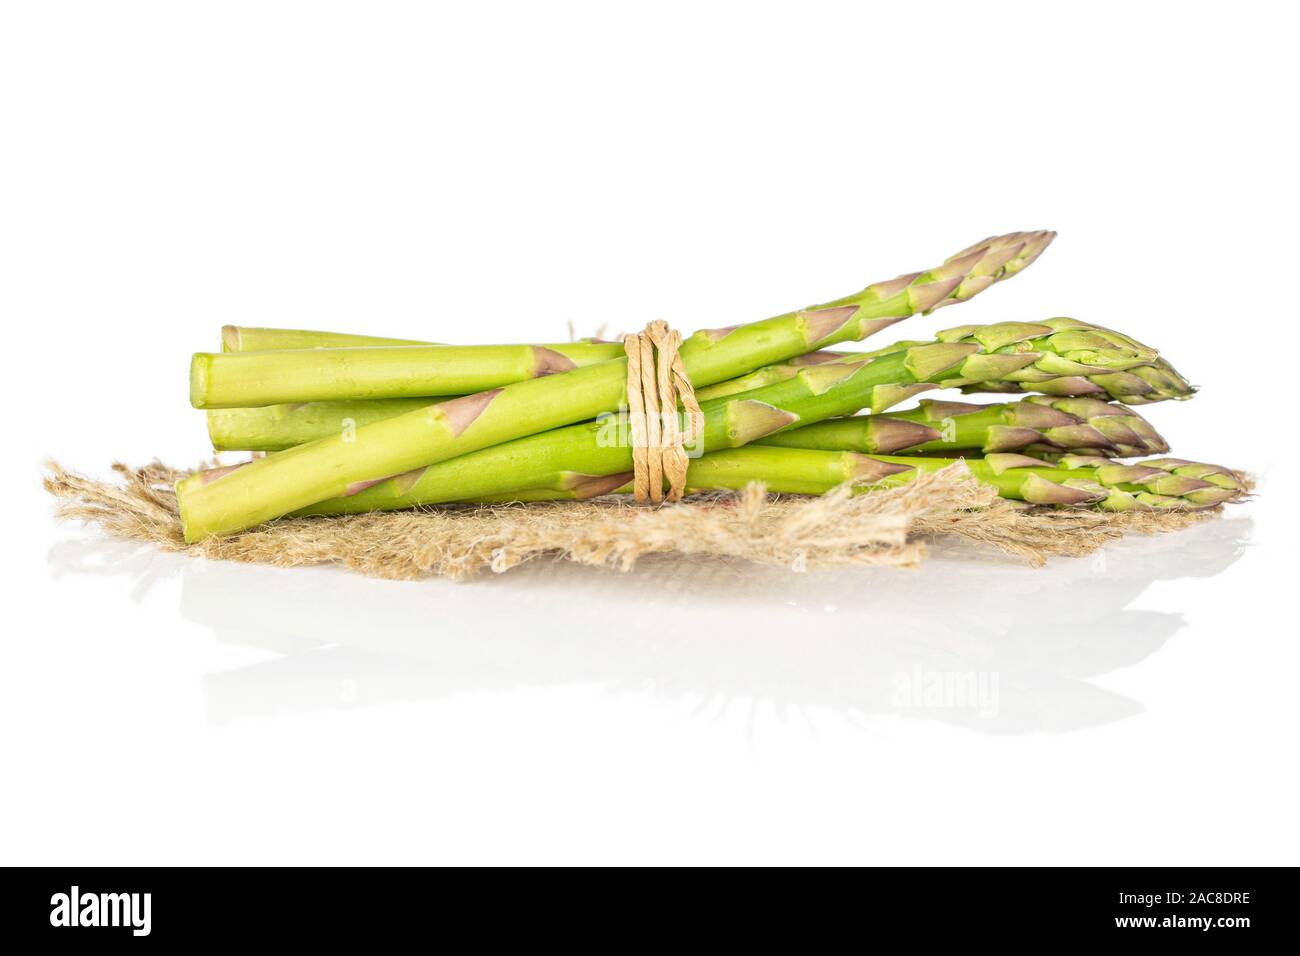 Lot of whole healthy green asparagus with straw rope and jute fabric isolated on white background Stock Photo